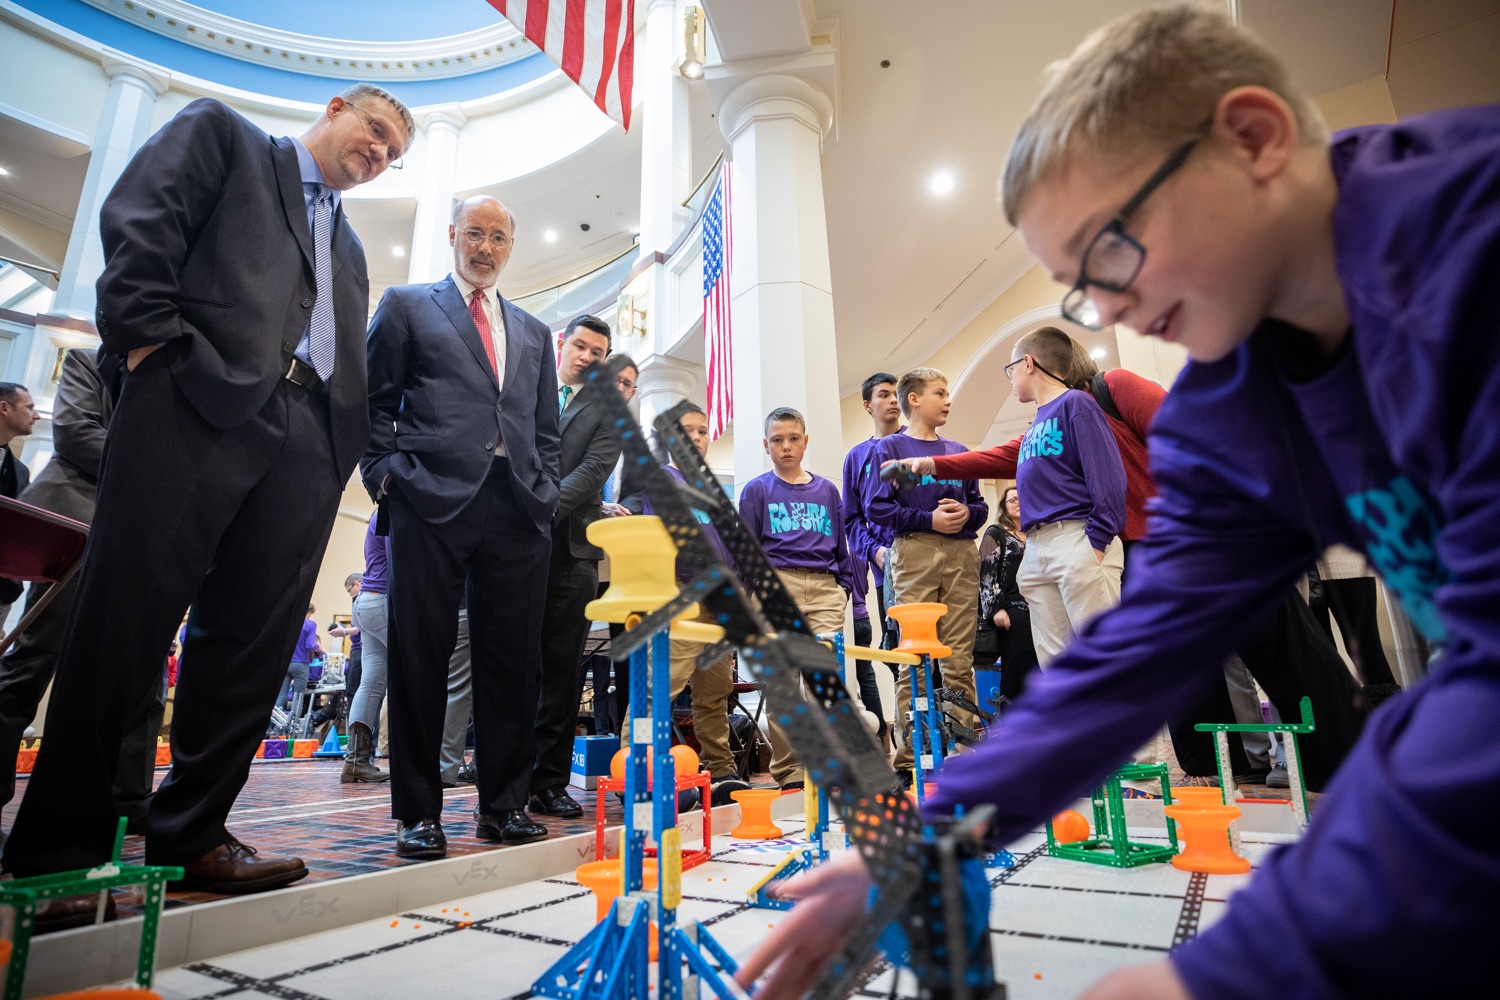 Pennsylvania Governor Tom Wolf meeting with students at the robotics demonstration.  Celebrating the success of the PAsmart workforce development program to create educational opportunities at schools across the commonwealth, Governor Tom Wolf welcomed more than 50 students from the Pennsylvania Rural Robotics Initiative to the Capitol today. The students from nine western Pennsylvania school districts showcased their skills in coding, robotics and drone technology. The Wolf administration awarded the initiative a $299,000 PAsmart Advancing Grant earlier this year. Harrisburg, PA  Tuesday, November 12, 2019<br><a href="https://filesource.amperwave.net/commonwealthofpa/photo/17587_gov_pasmart_rural_robotics_dz_004.jpg" target="_blank">⇣ Download Photo</a>